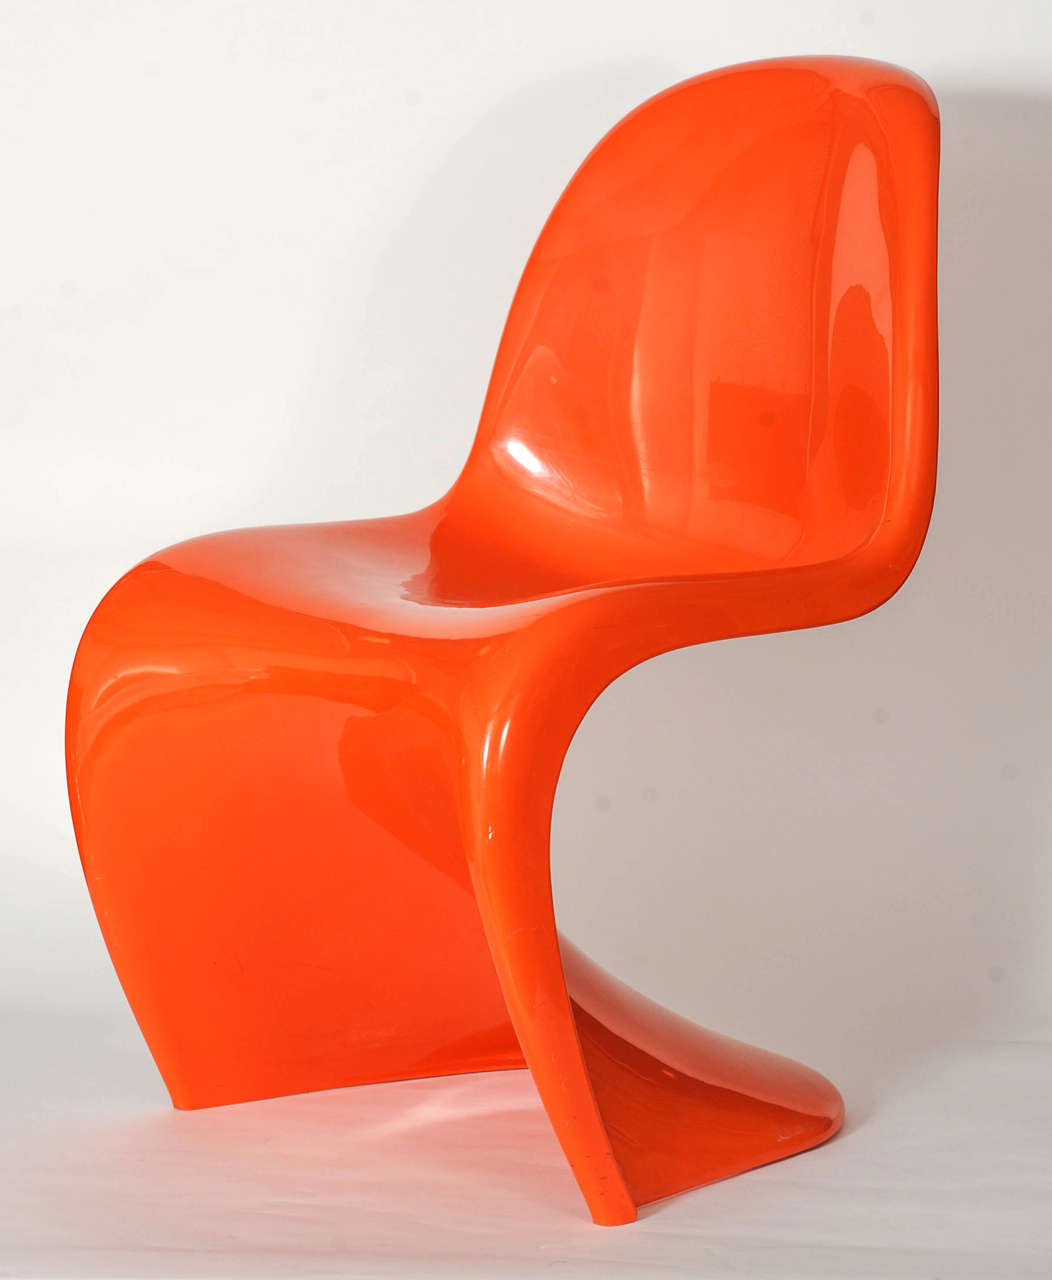 This pair of original Panton chairs was made by Herman Miller Fehlbaum in 1974.
This well-known design, released in 1967, is the signature work of Verner Panton in its most original version.
        